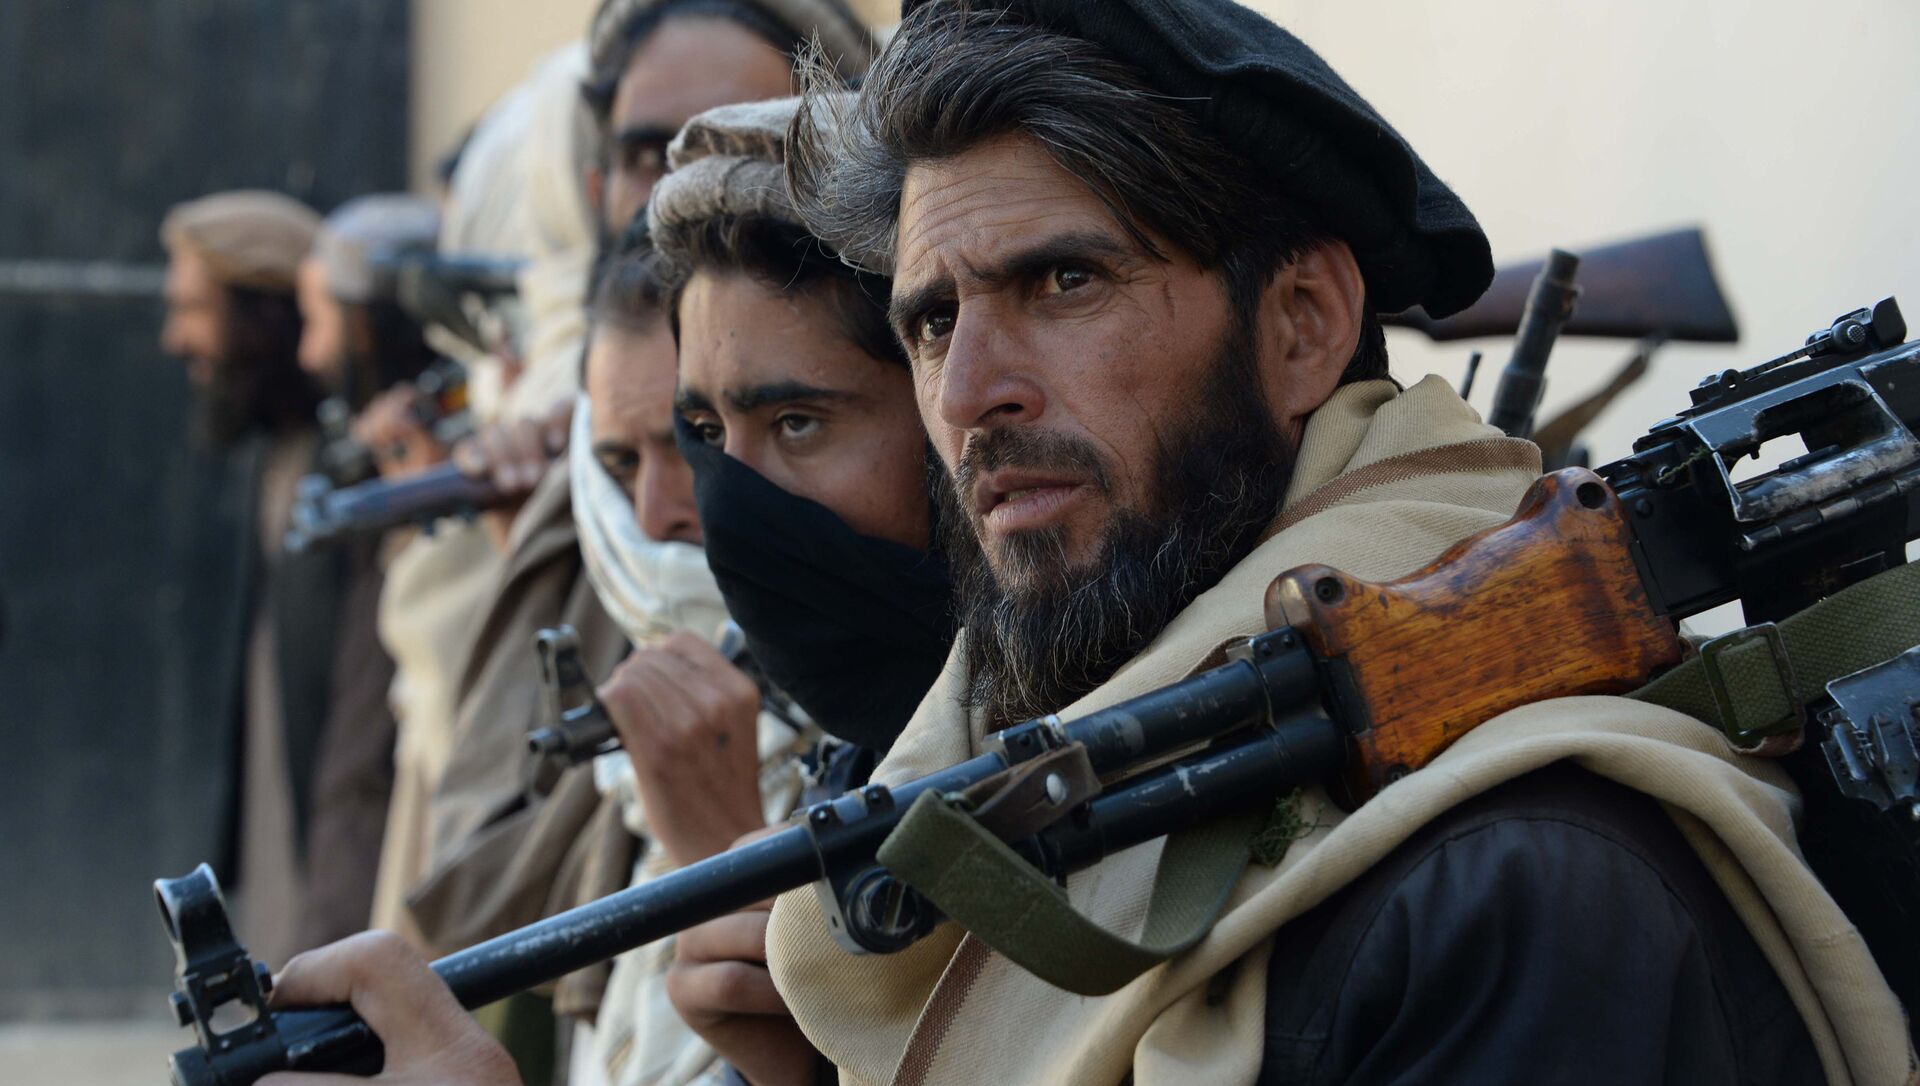 Afghan alleged former Taliban fighters carry their weapons before handing them over as part of a government peace and reconciliation process at a ceremony in Jalalabad on February 24, 2016 - Sputnik International, 1920, 24.08.2021